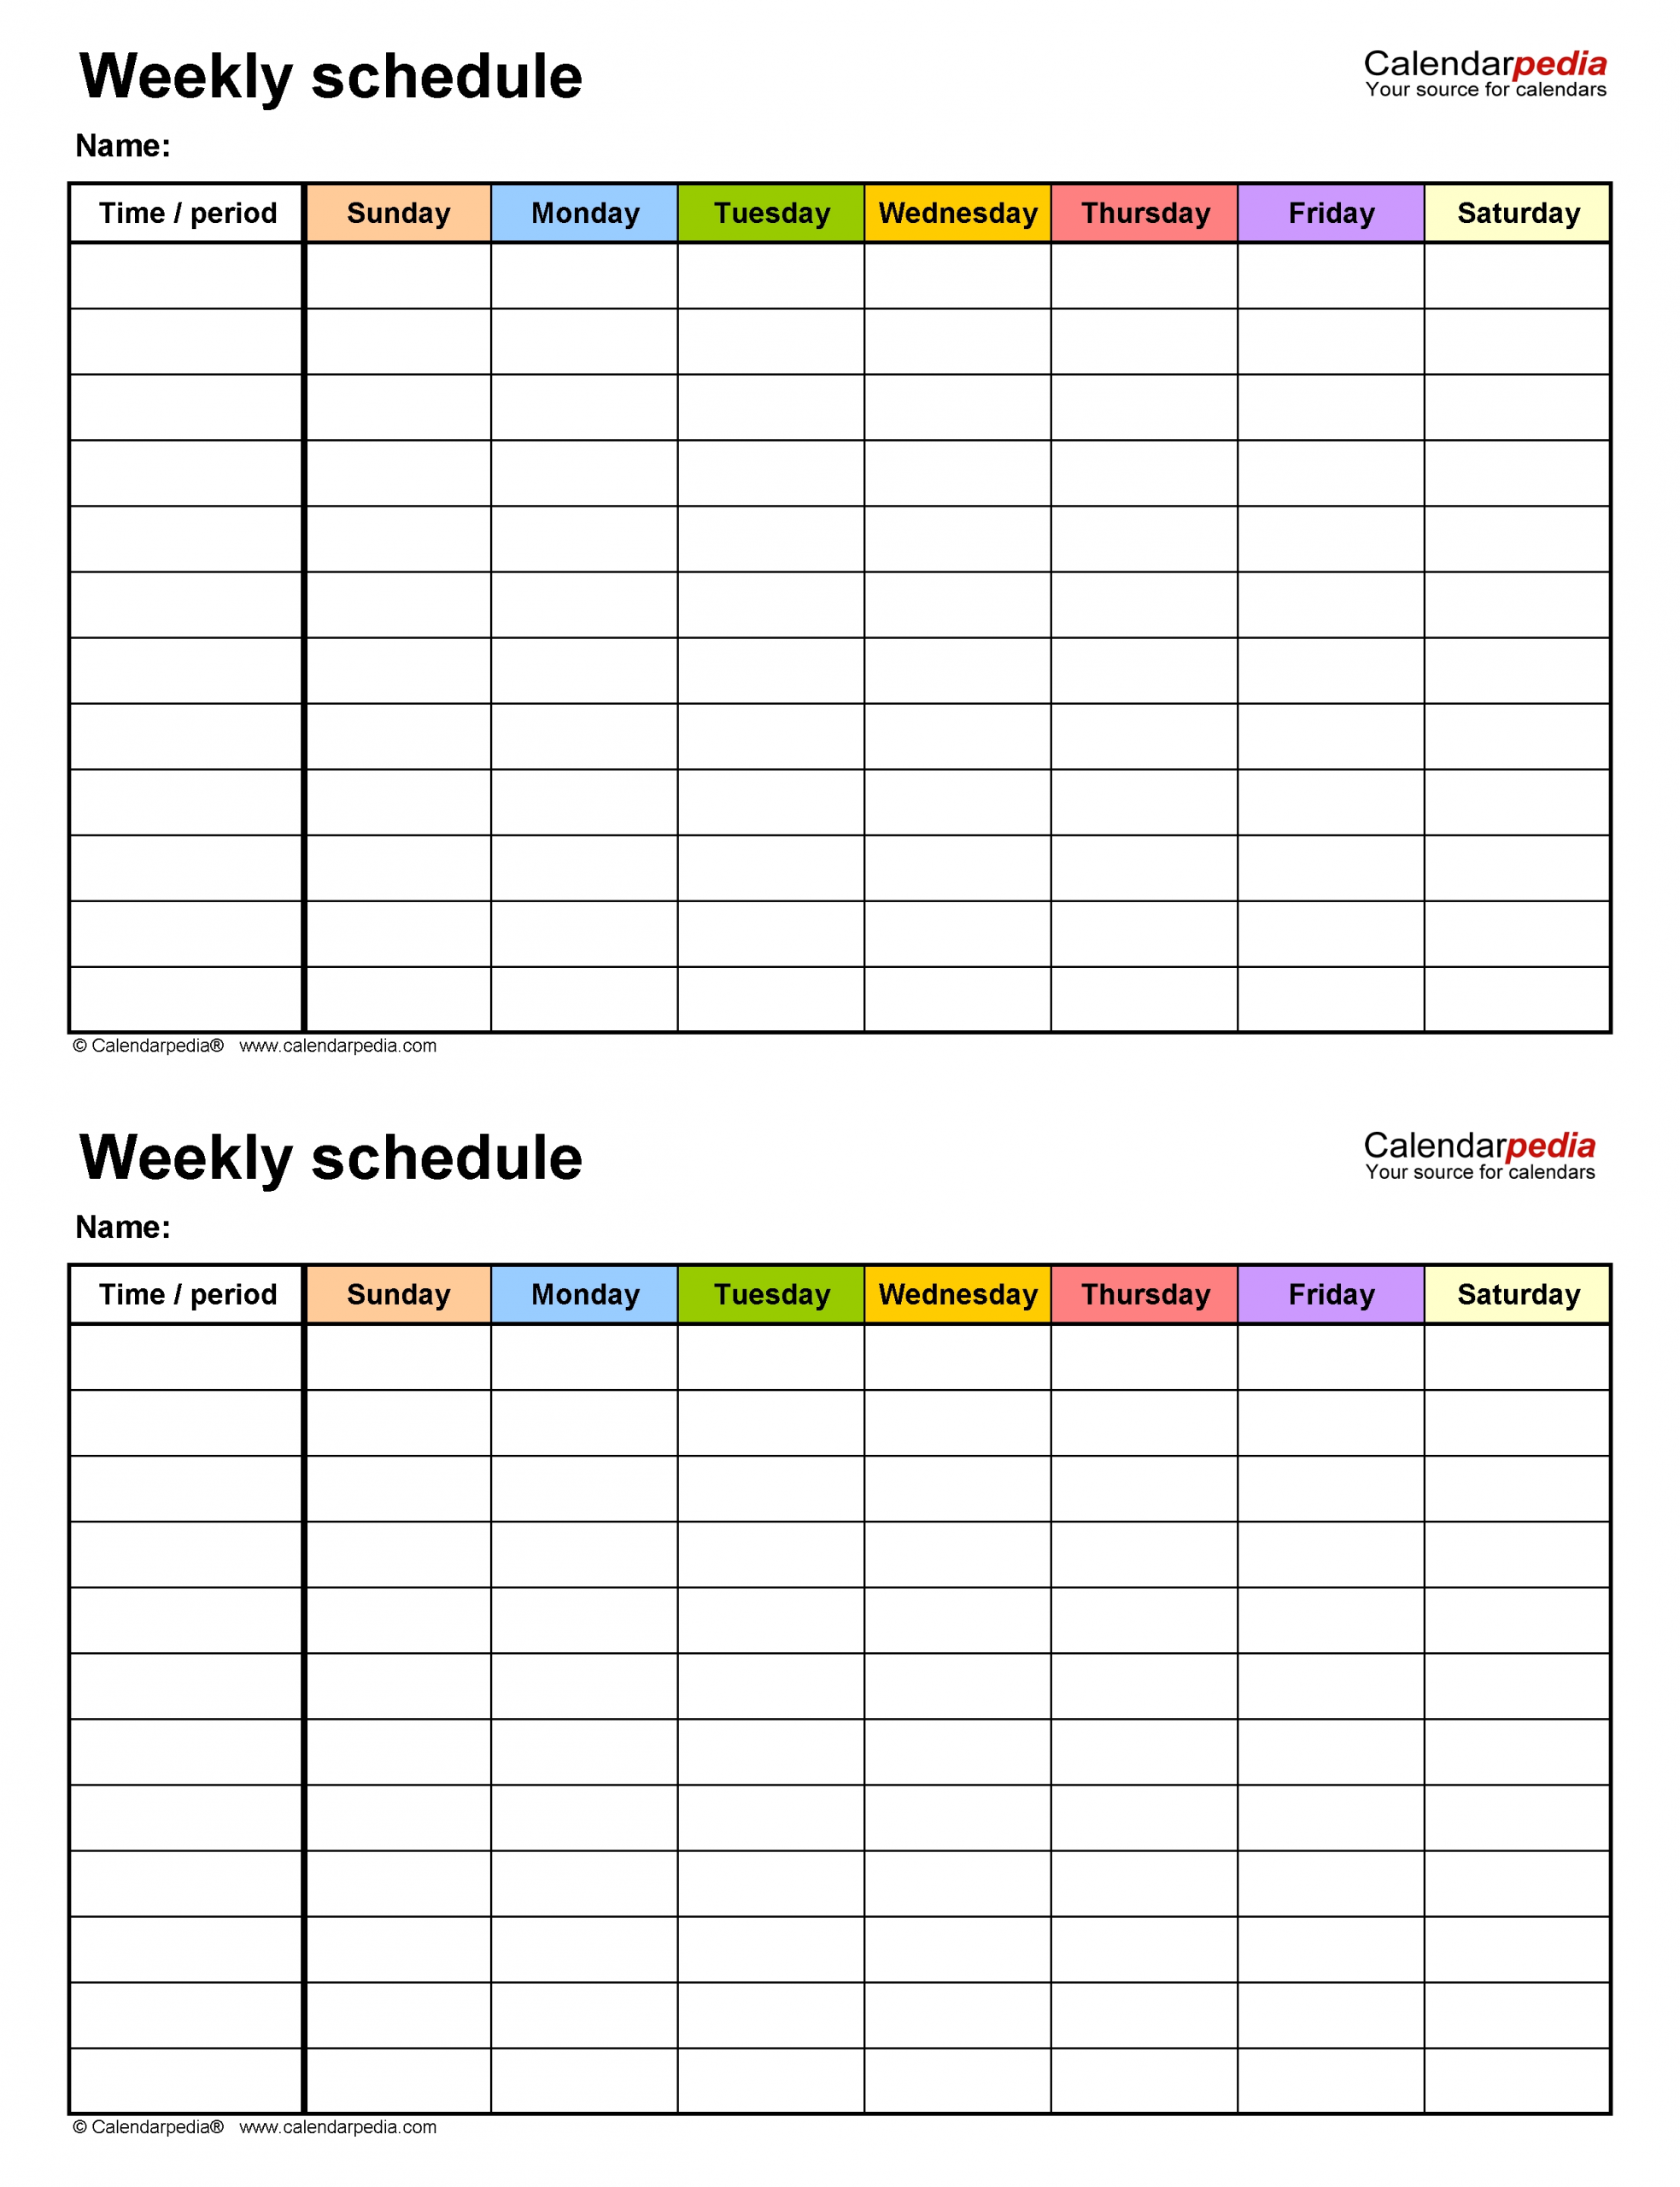 Free Weekly Schedule Templates For Word - 18 Templates  7 Day Weekly Planner Template